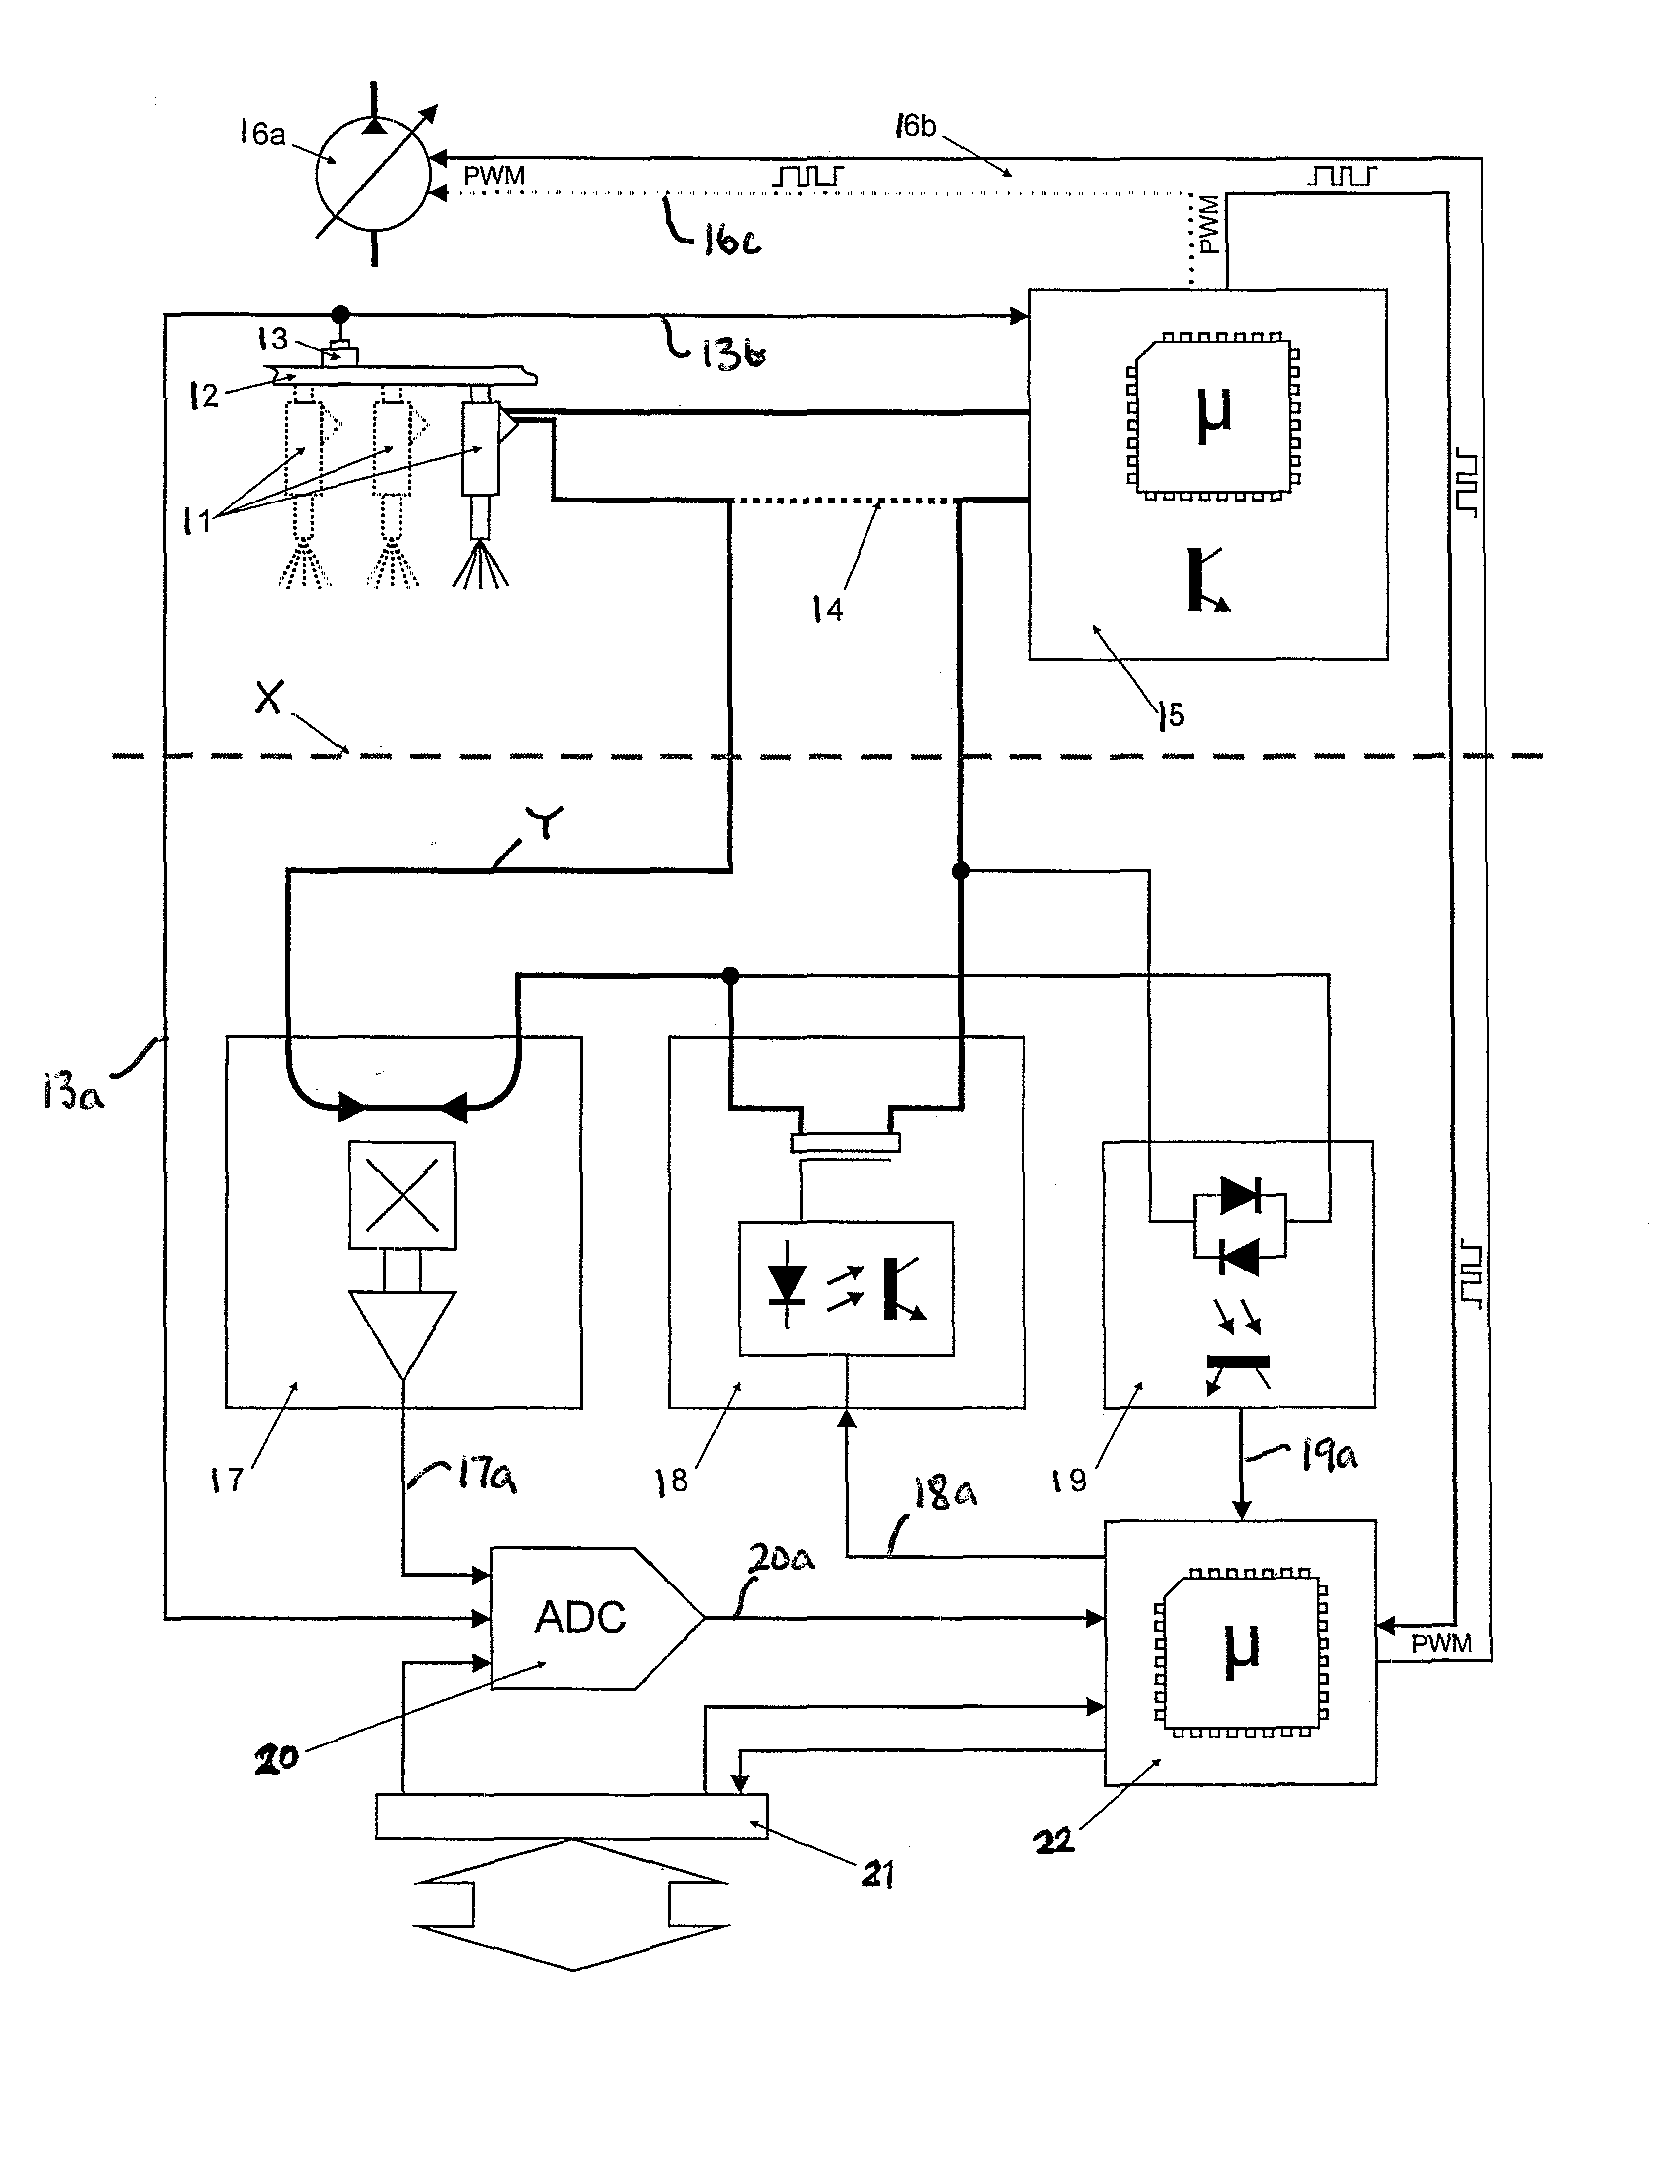 System for and method of degrading or analysing the performance of an internal combustion engine